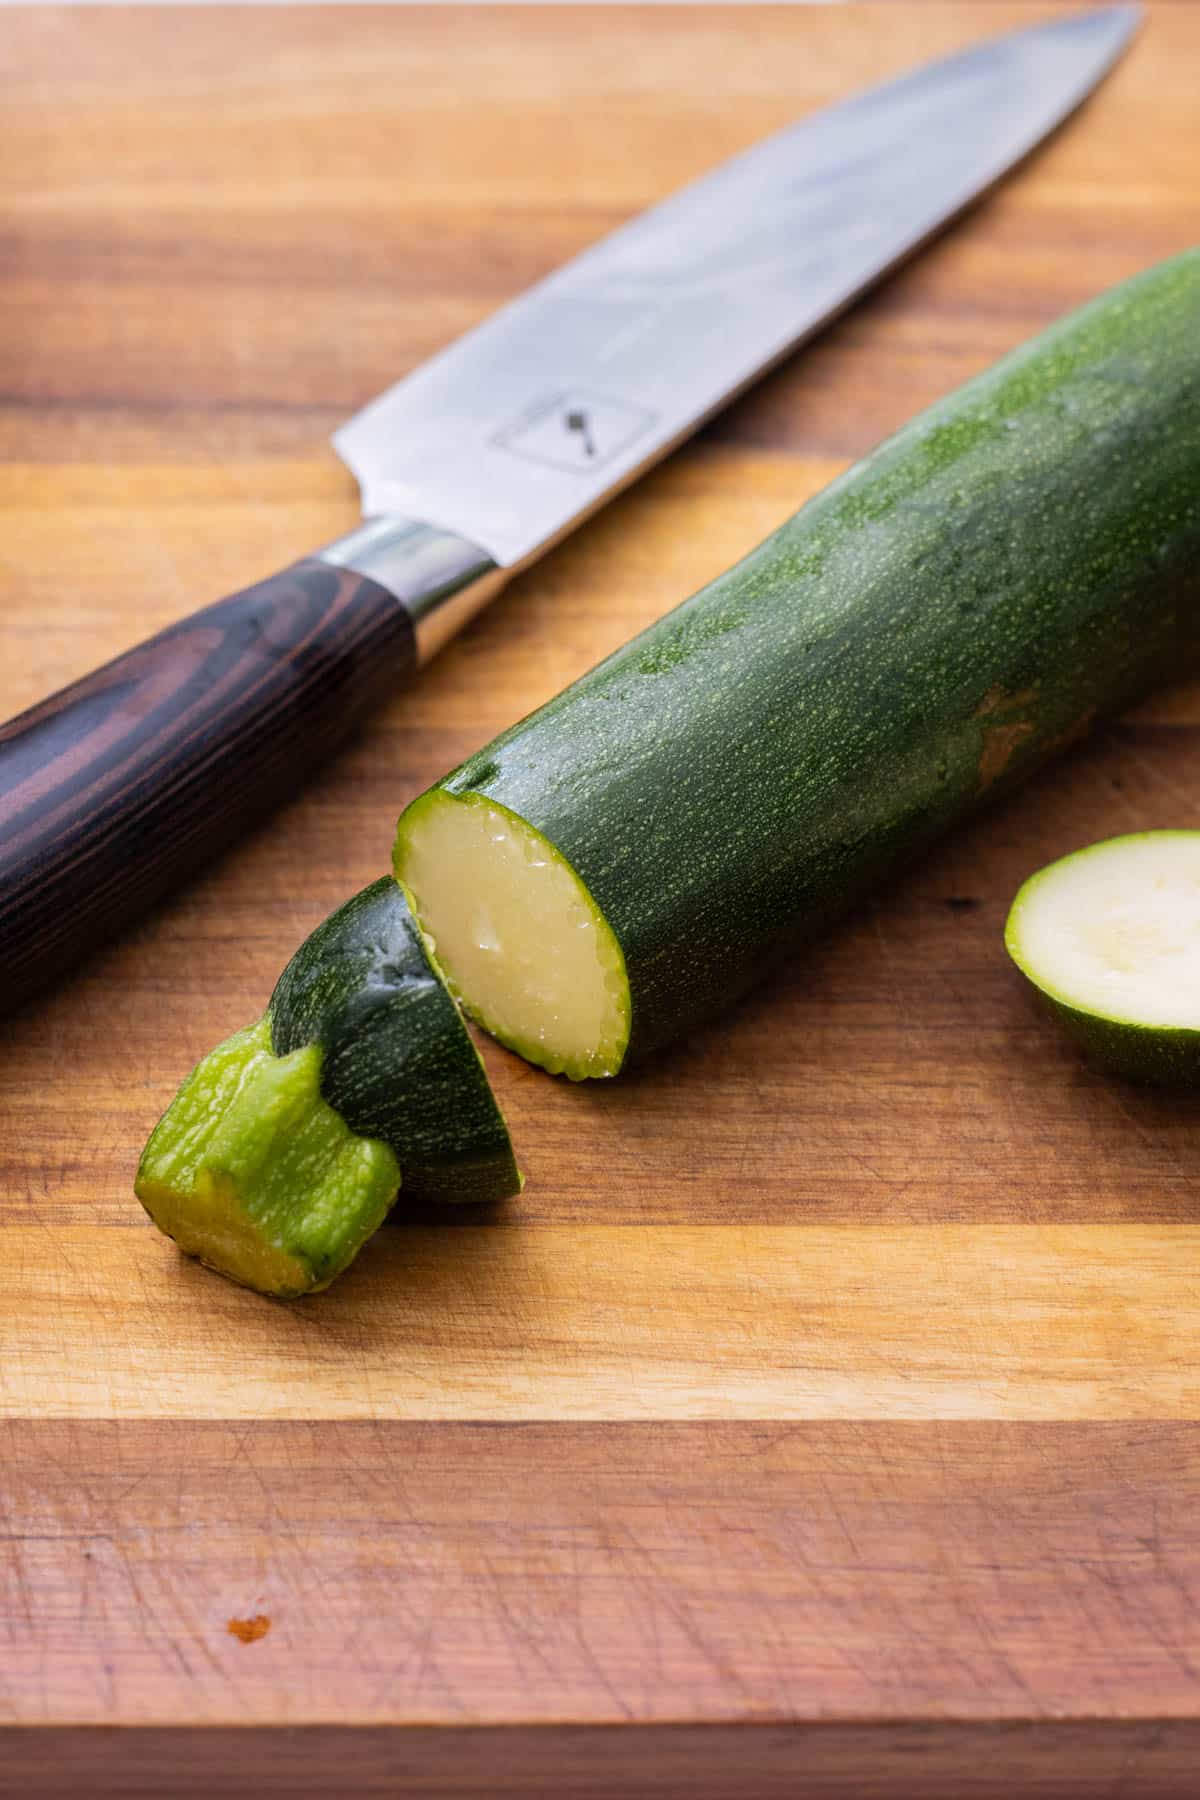 The ends are sliced off a zucchini.